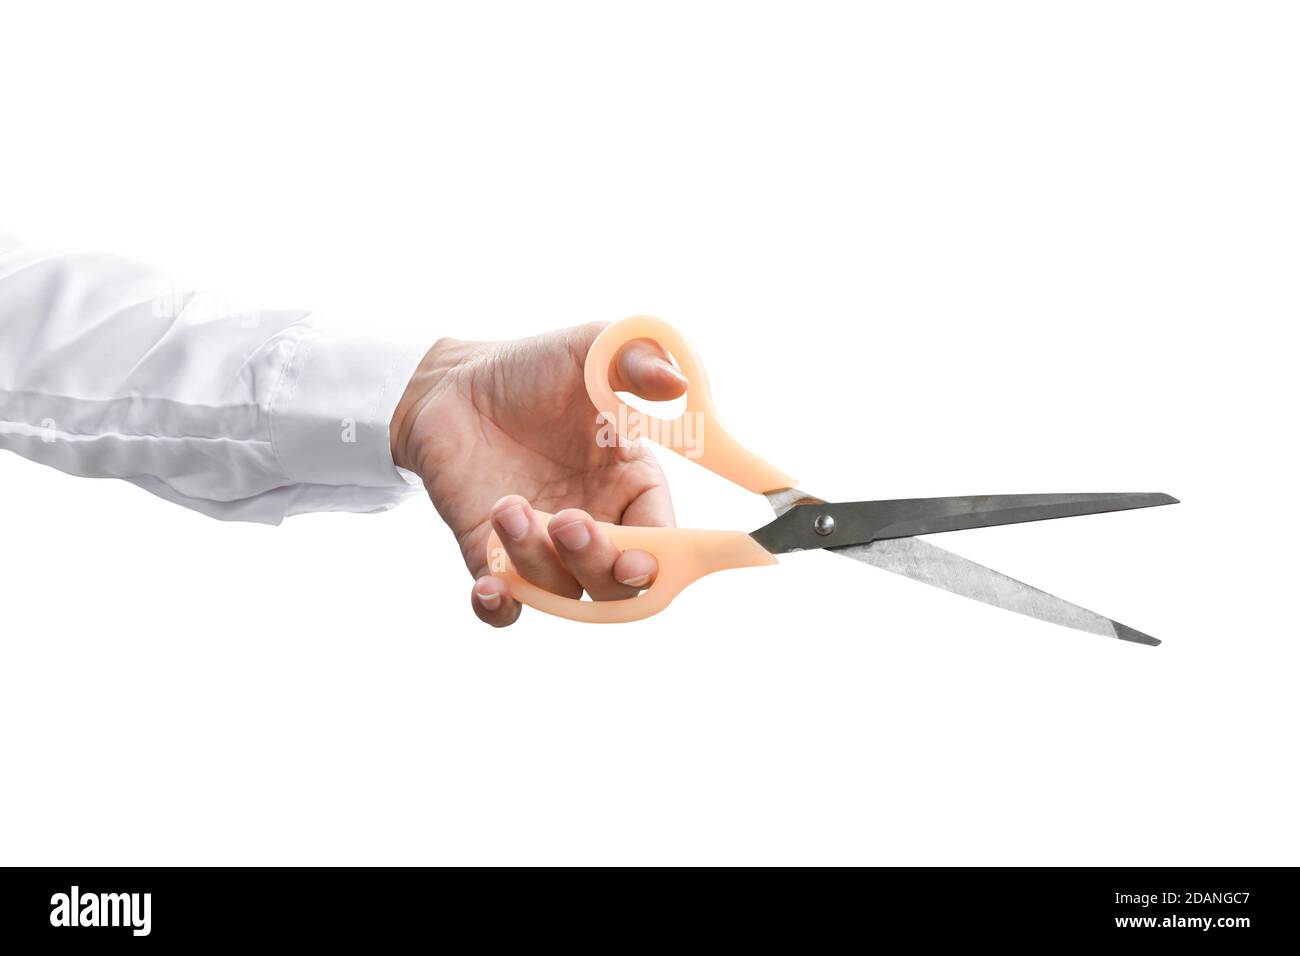 Hand with Scissors Cutting String Holding House Stock Image - Image of  market, hand: 8964873